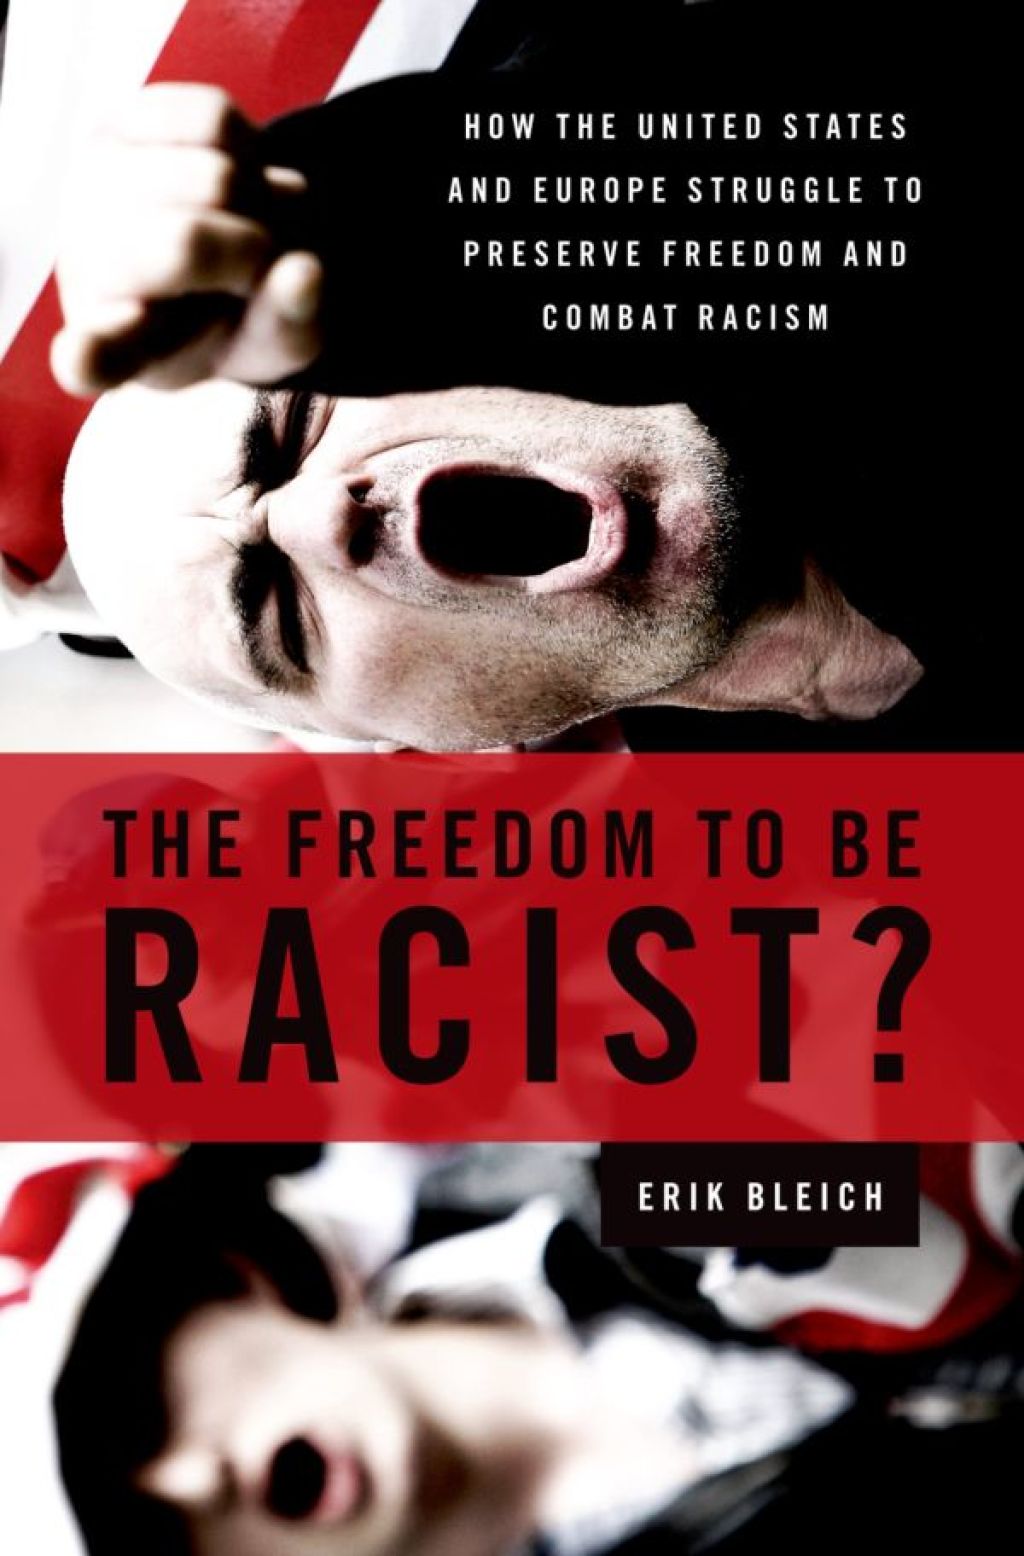 The Freedom to Be Racist? (eBook Rental) - Erik Bleich,